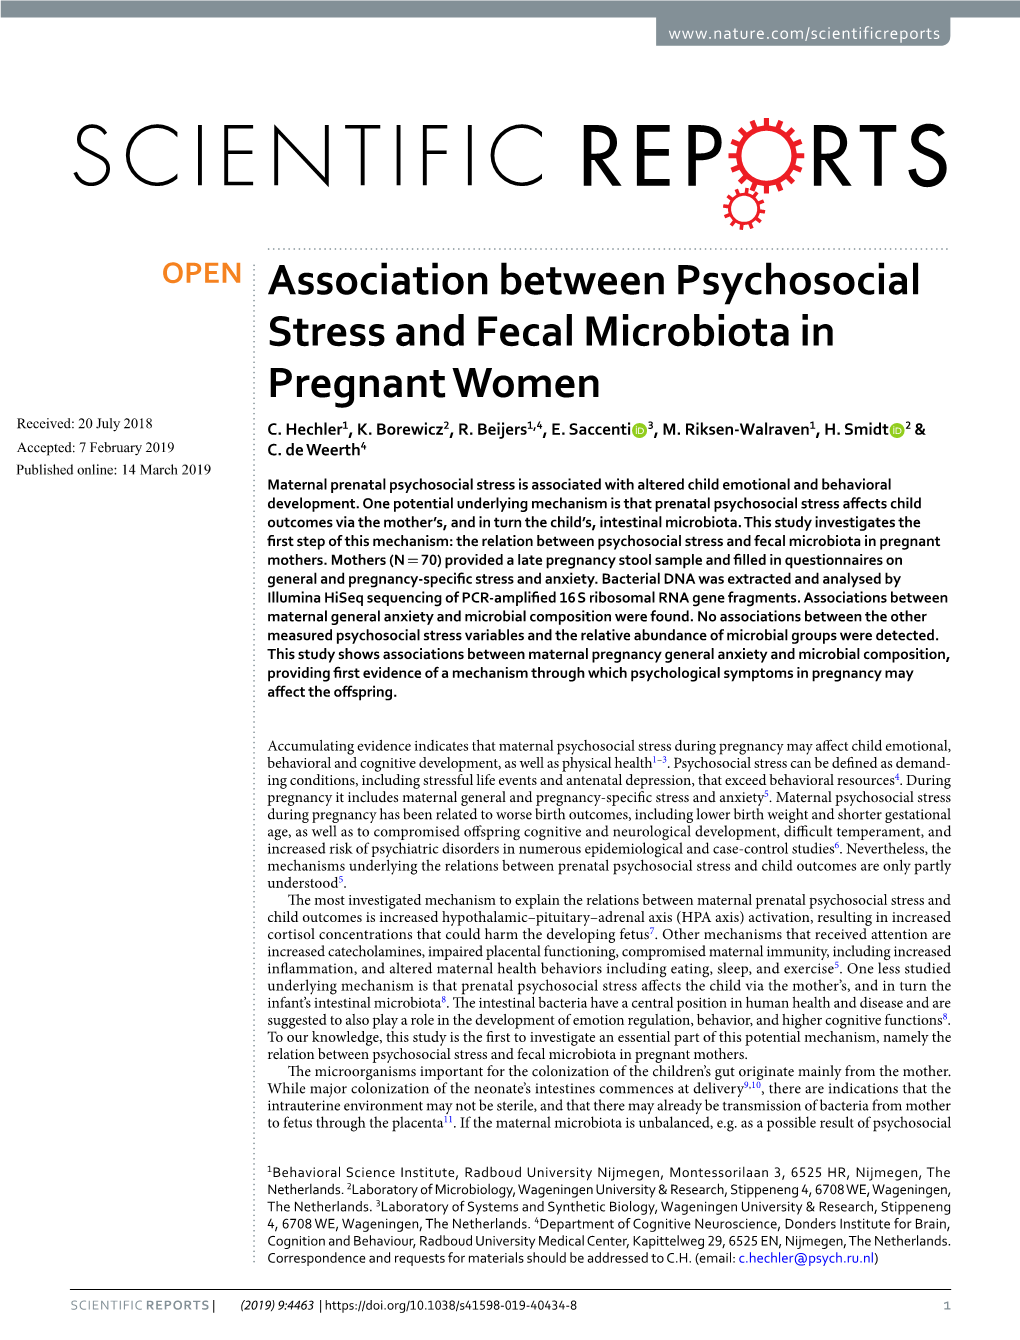 Association Between Psychosocial Stress and Fecal Microbiota in Pregnant Women Received: 20 July 2018 C